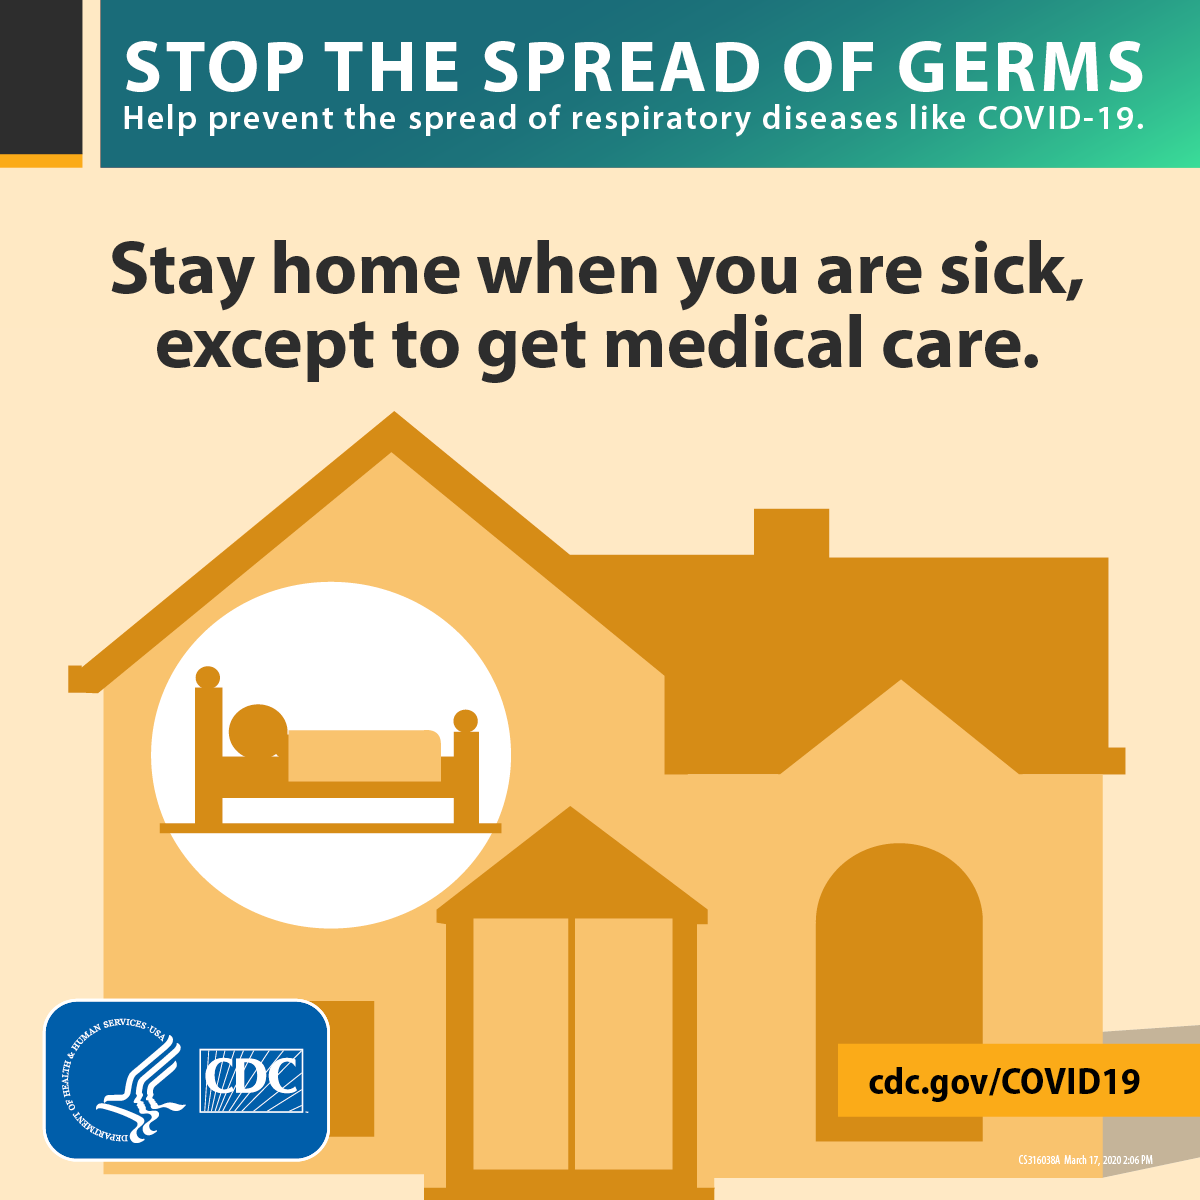 CDC Stop the spread of germs